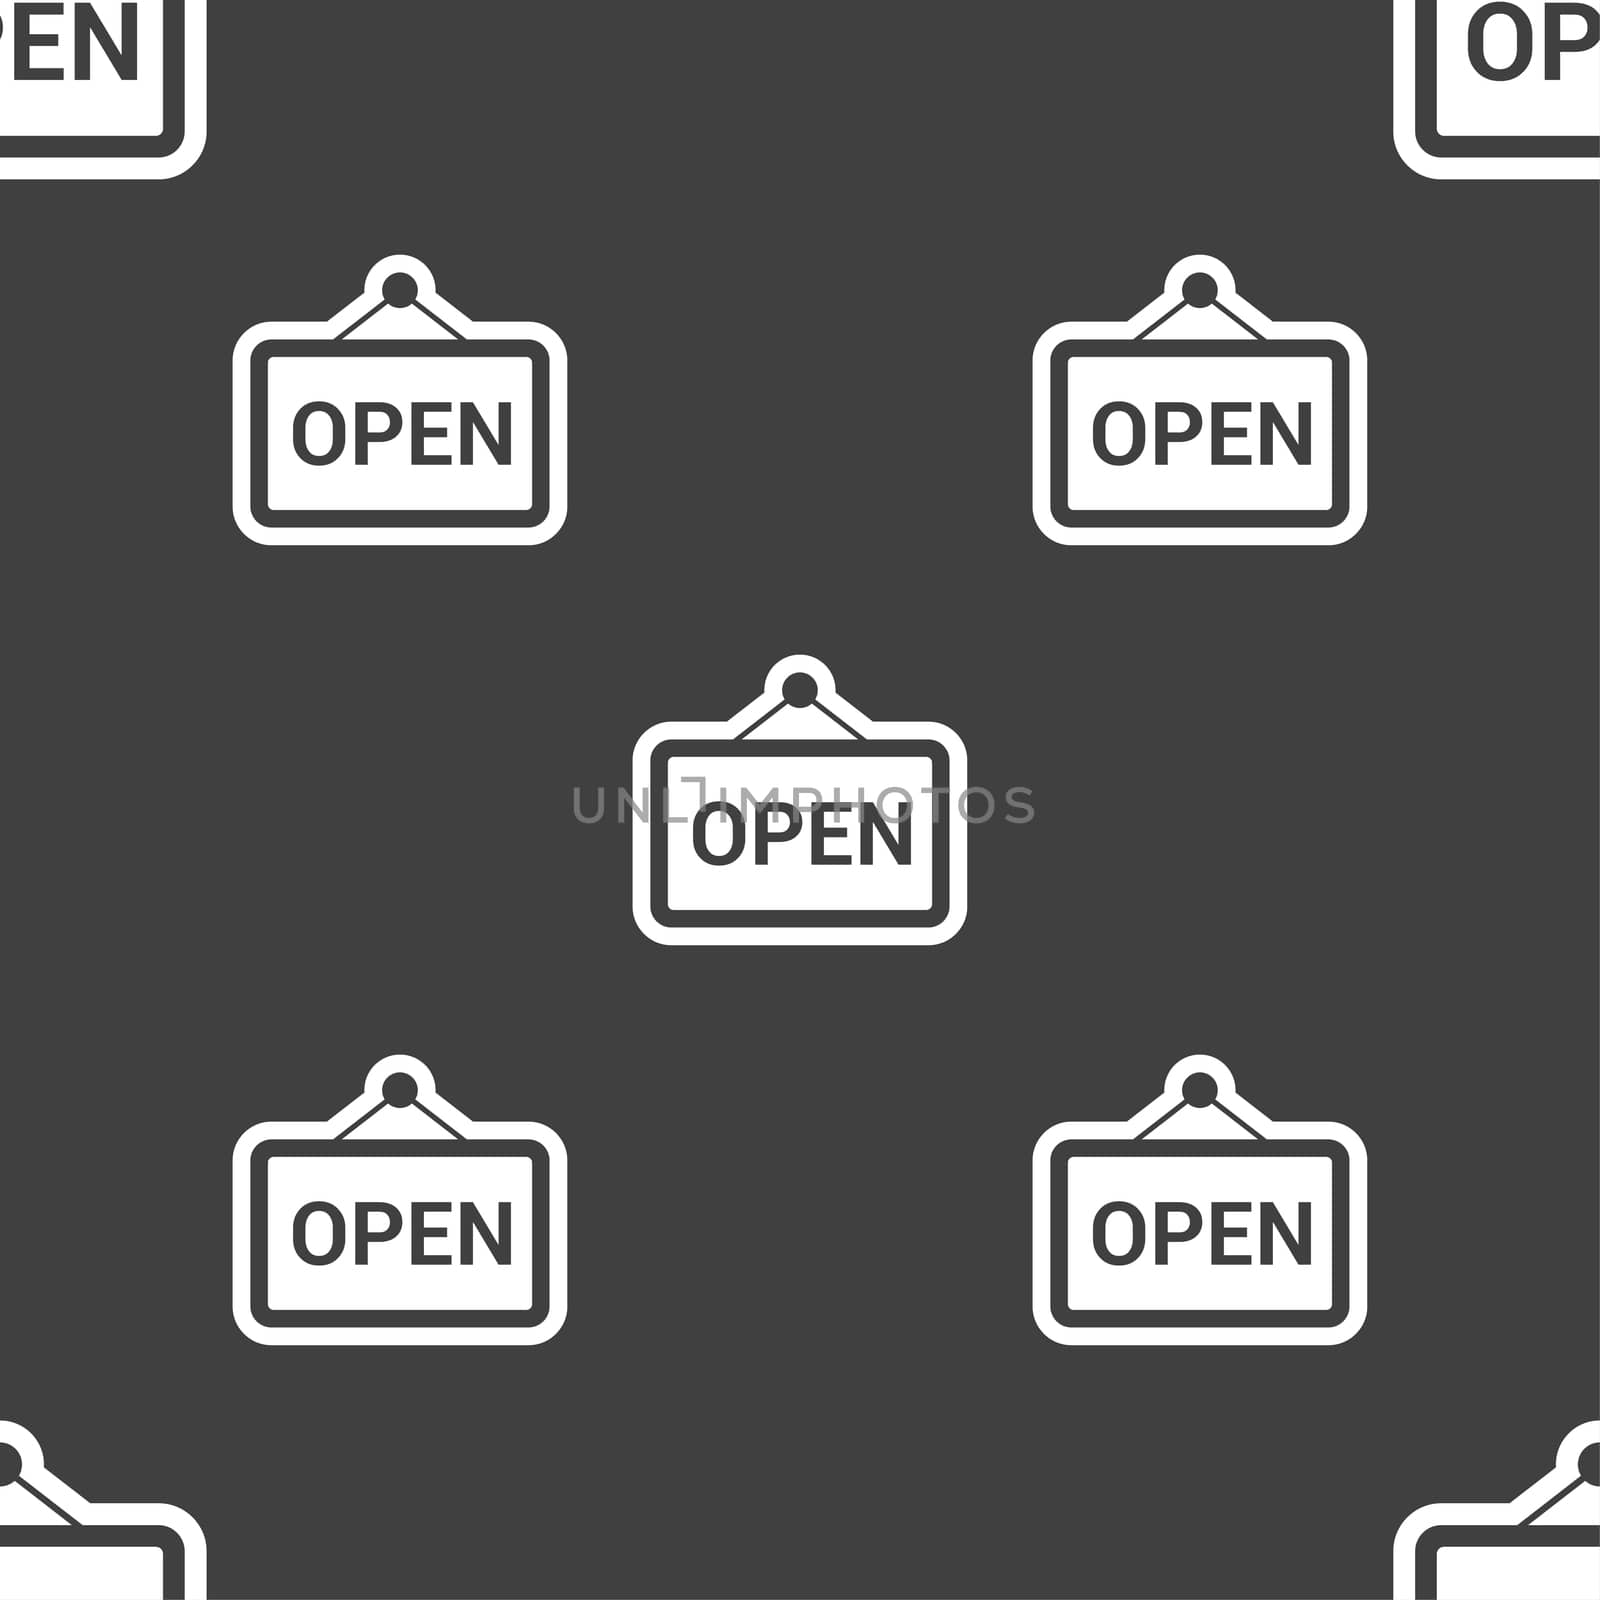 open icon sign. Seamless pattern on a gray background.  by serhii_lohvyniuk